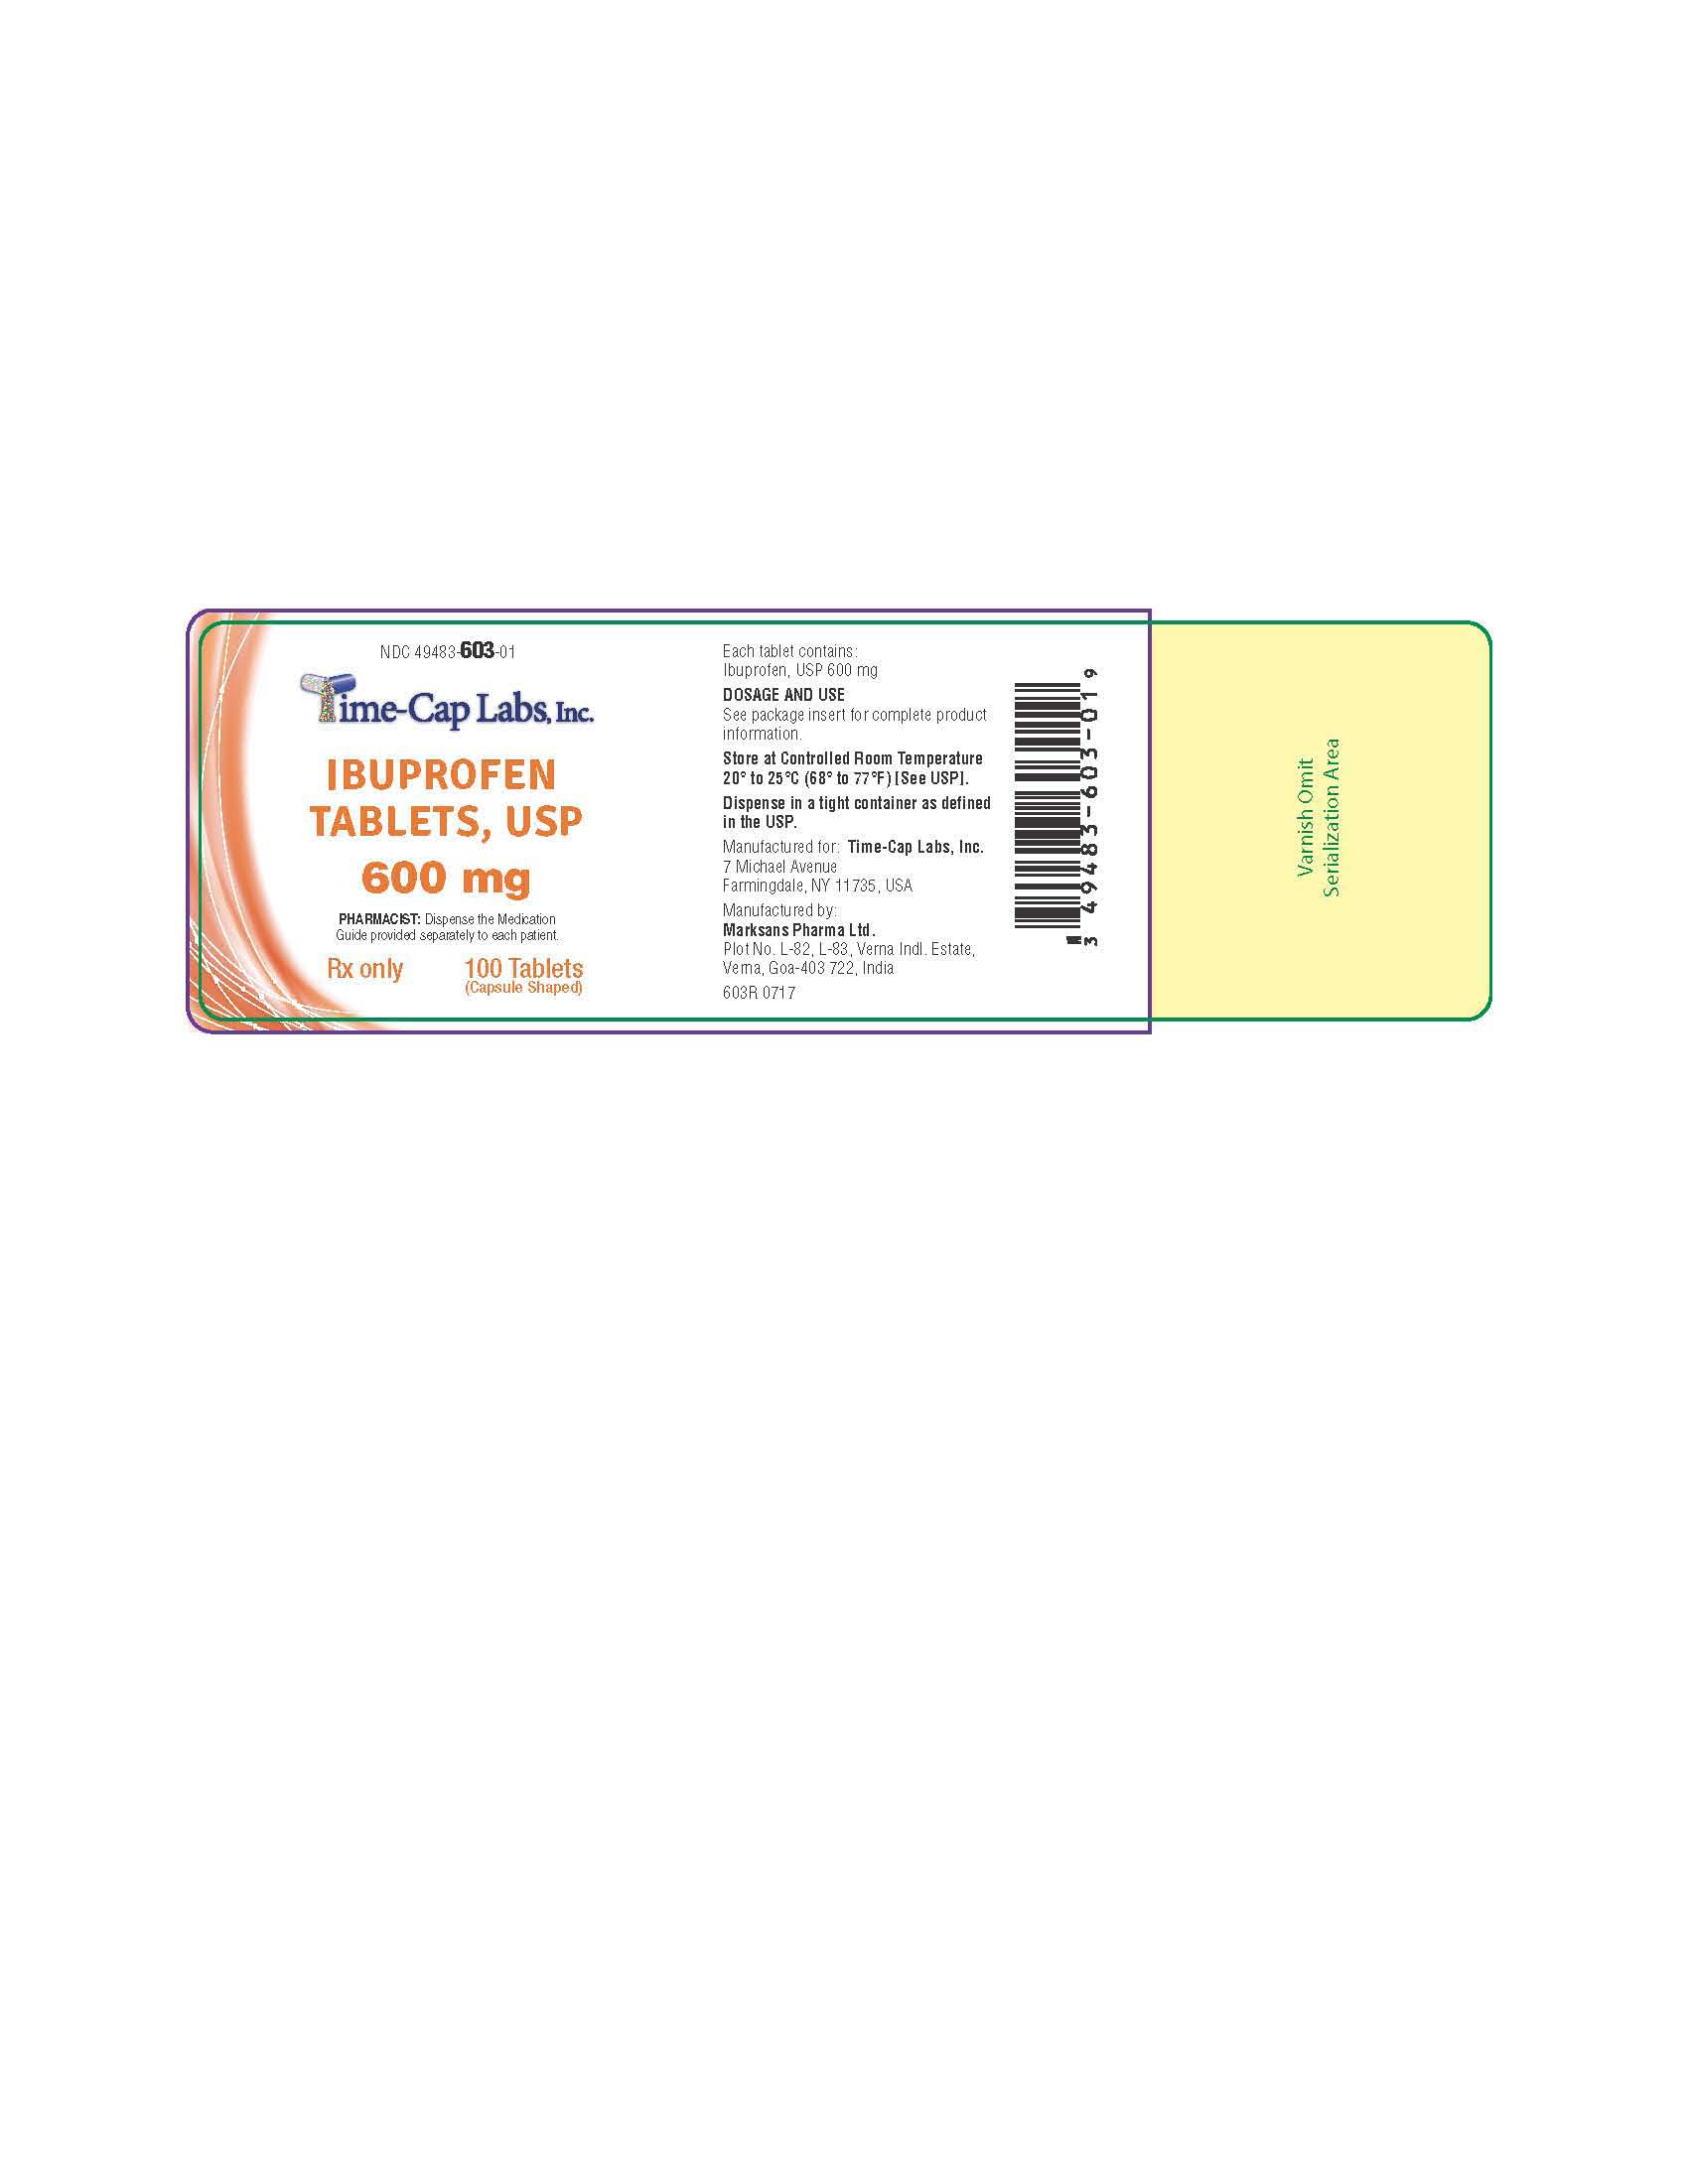 600 mg 100 count label